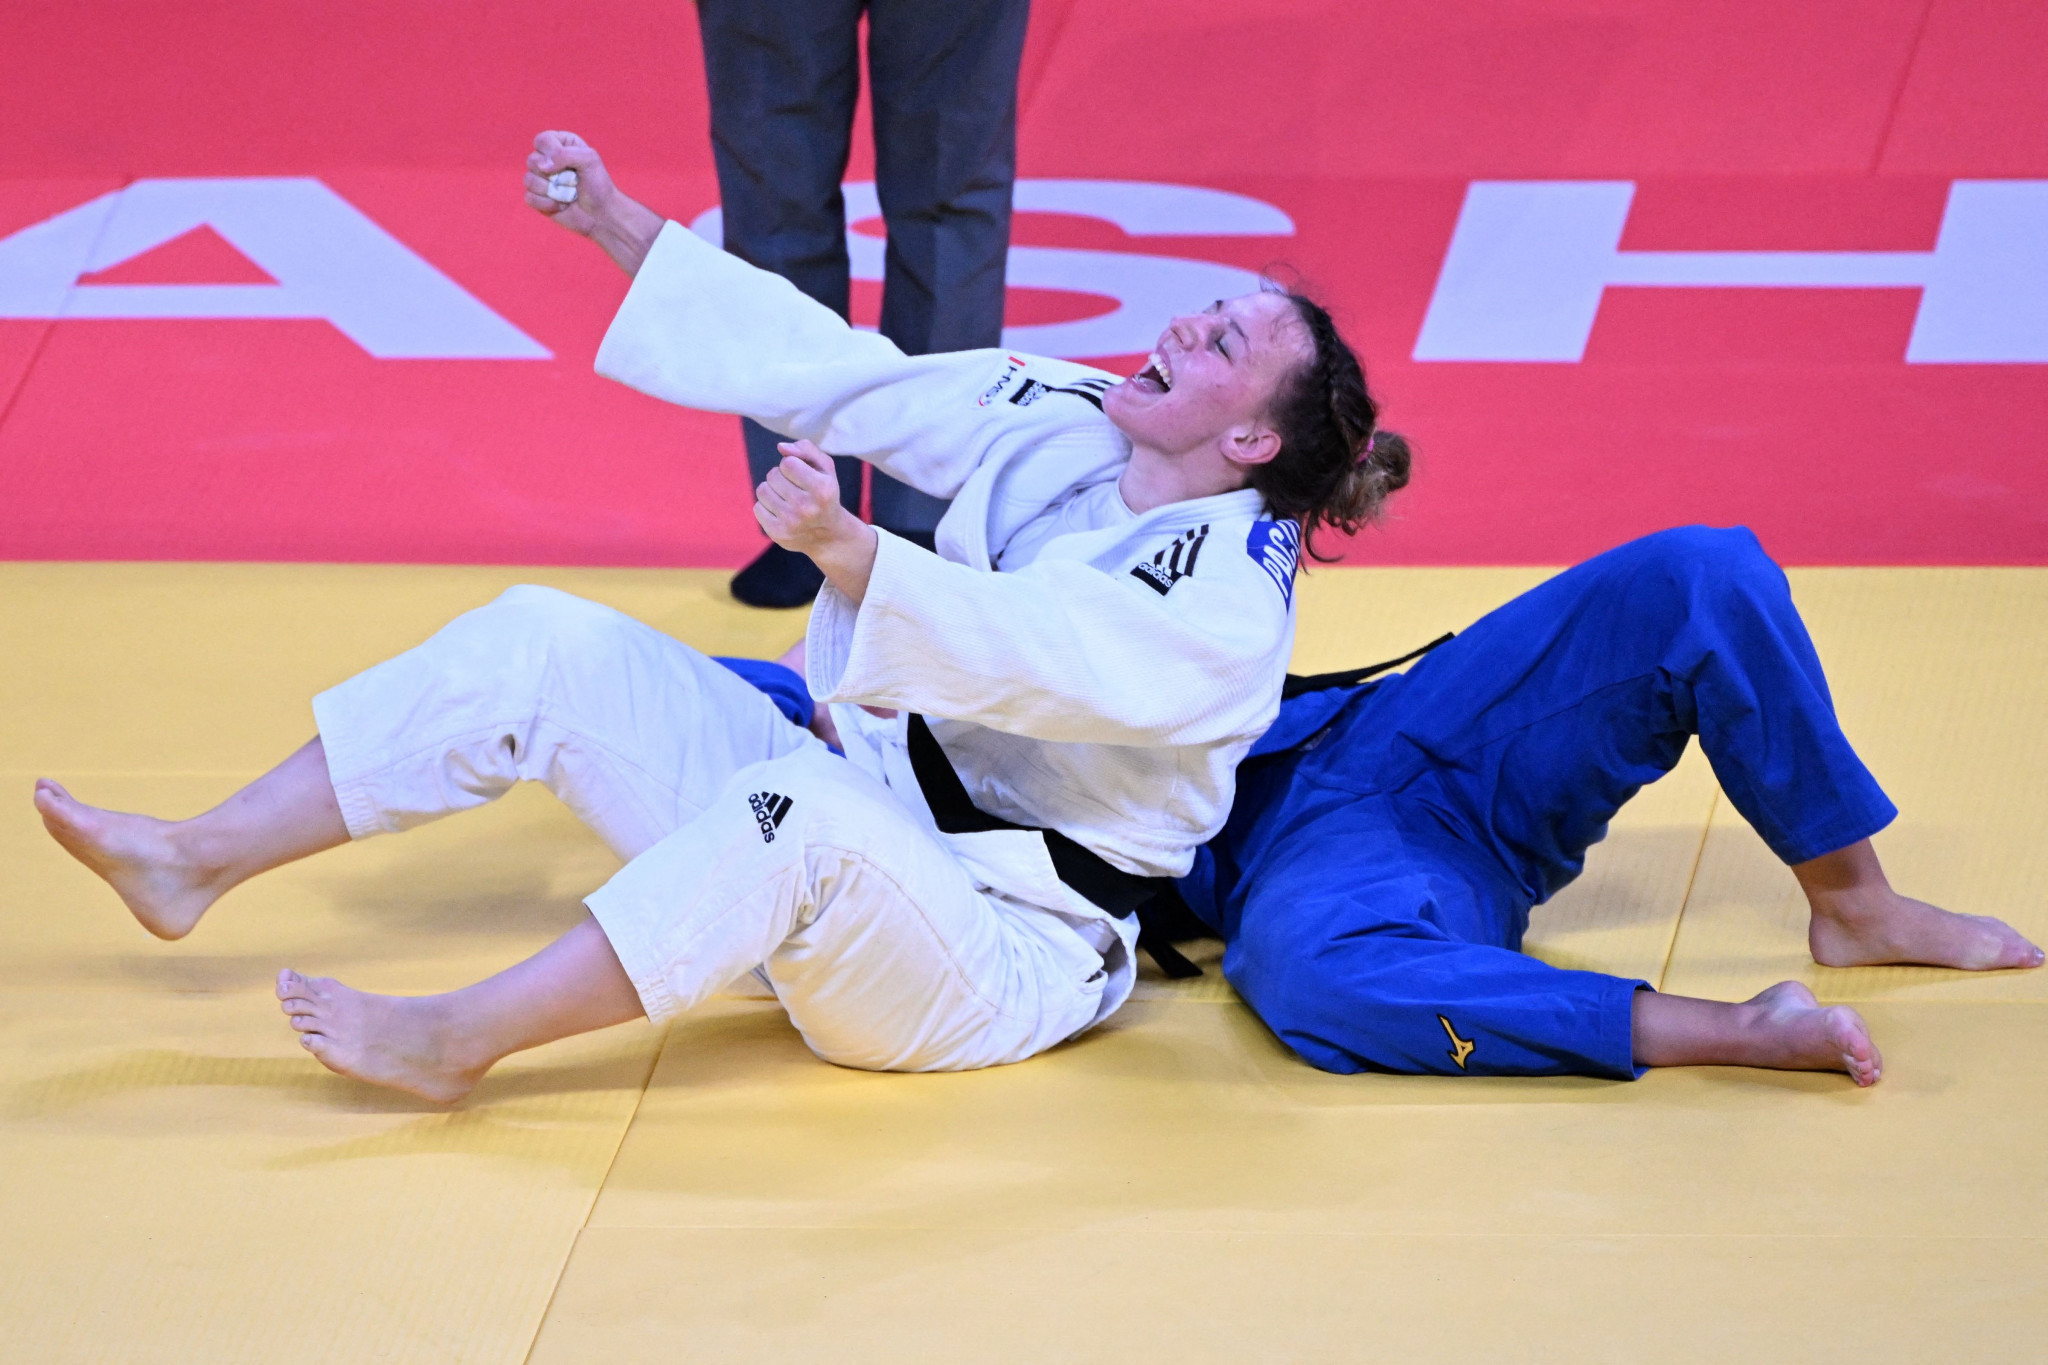 Poland's Beata Pacut-Kloczko will be hoping to star on home mats when judo competition gets underway ©Getty Images 